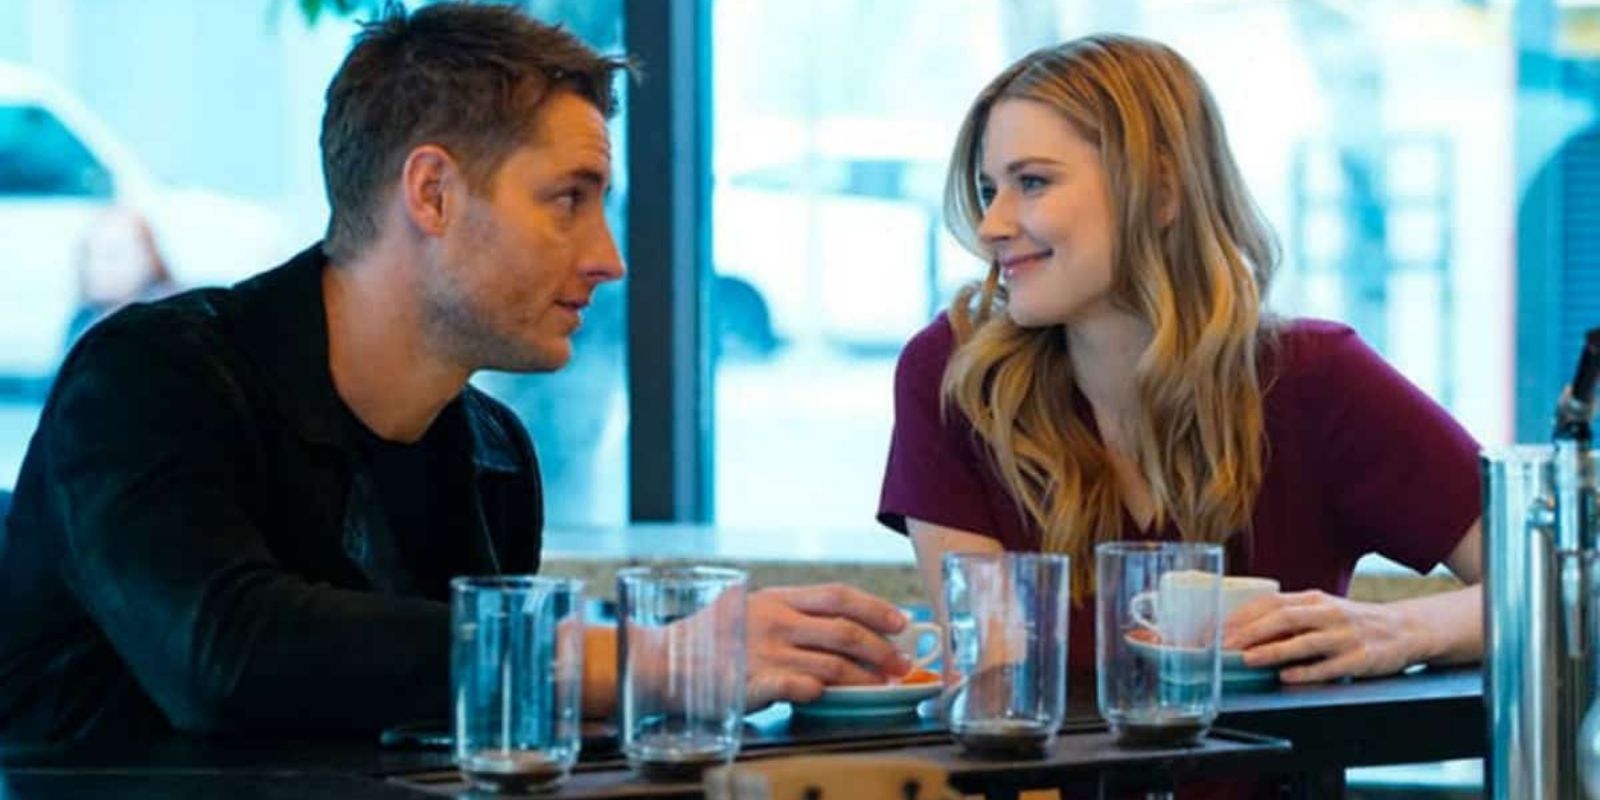 Kevin Pearson and Sophie smile at each other in a coffee shop in This Is Us.